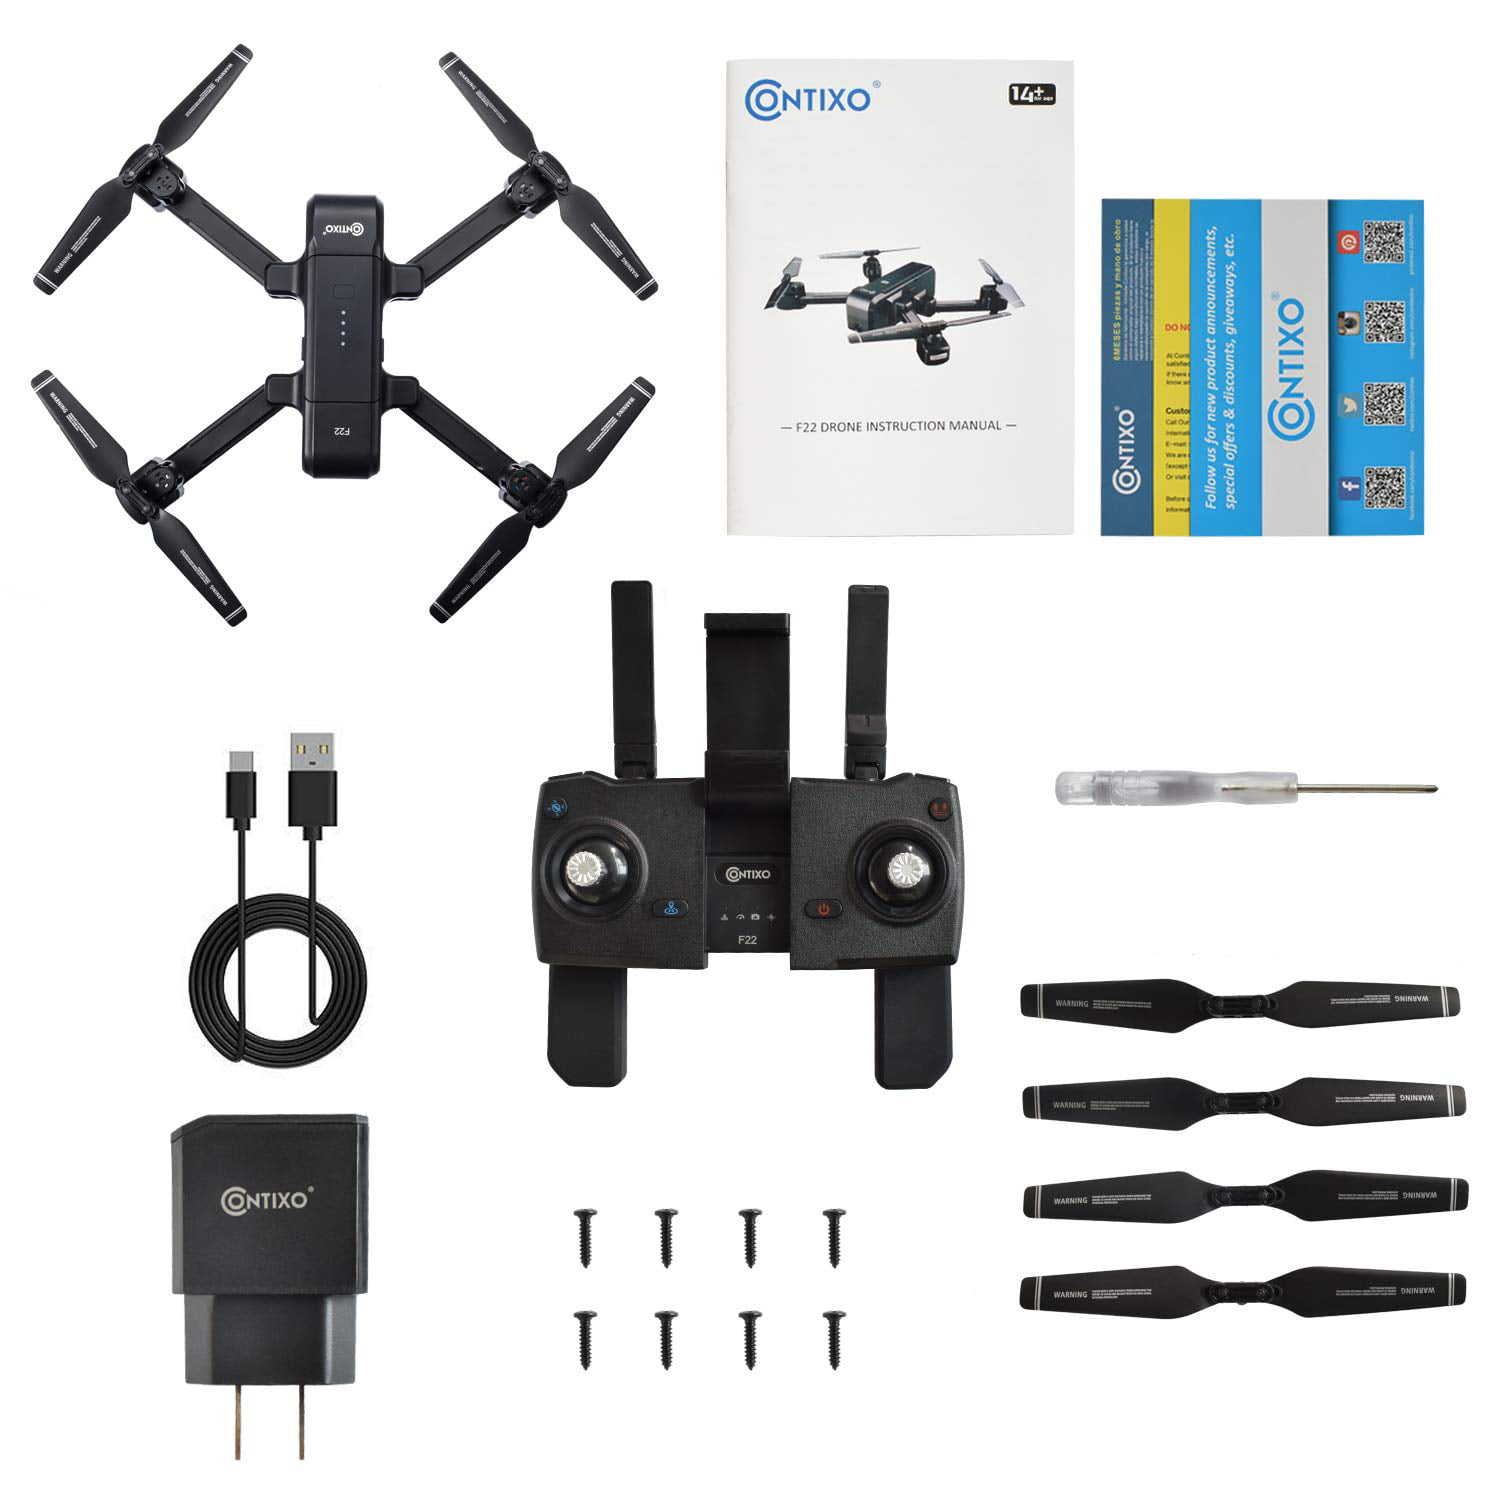 CONTIXO F28 Foldable 2K FHD Drone with GPS Control and Selfie Mode, Follow  Me, Way Point, and Orbit Mode and Carrying Case F28 - The Home Depot